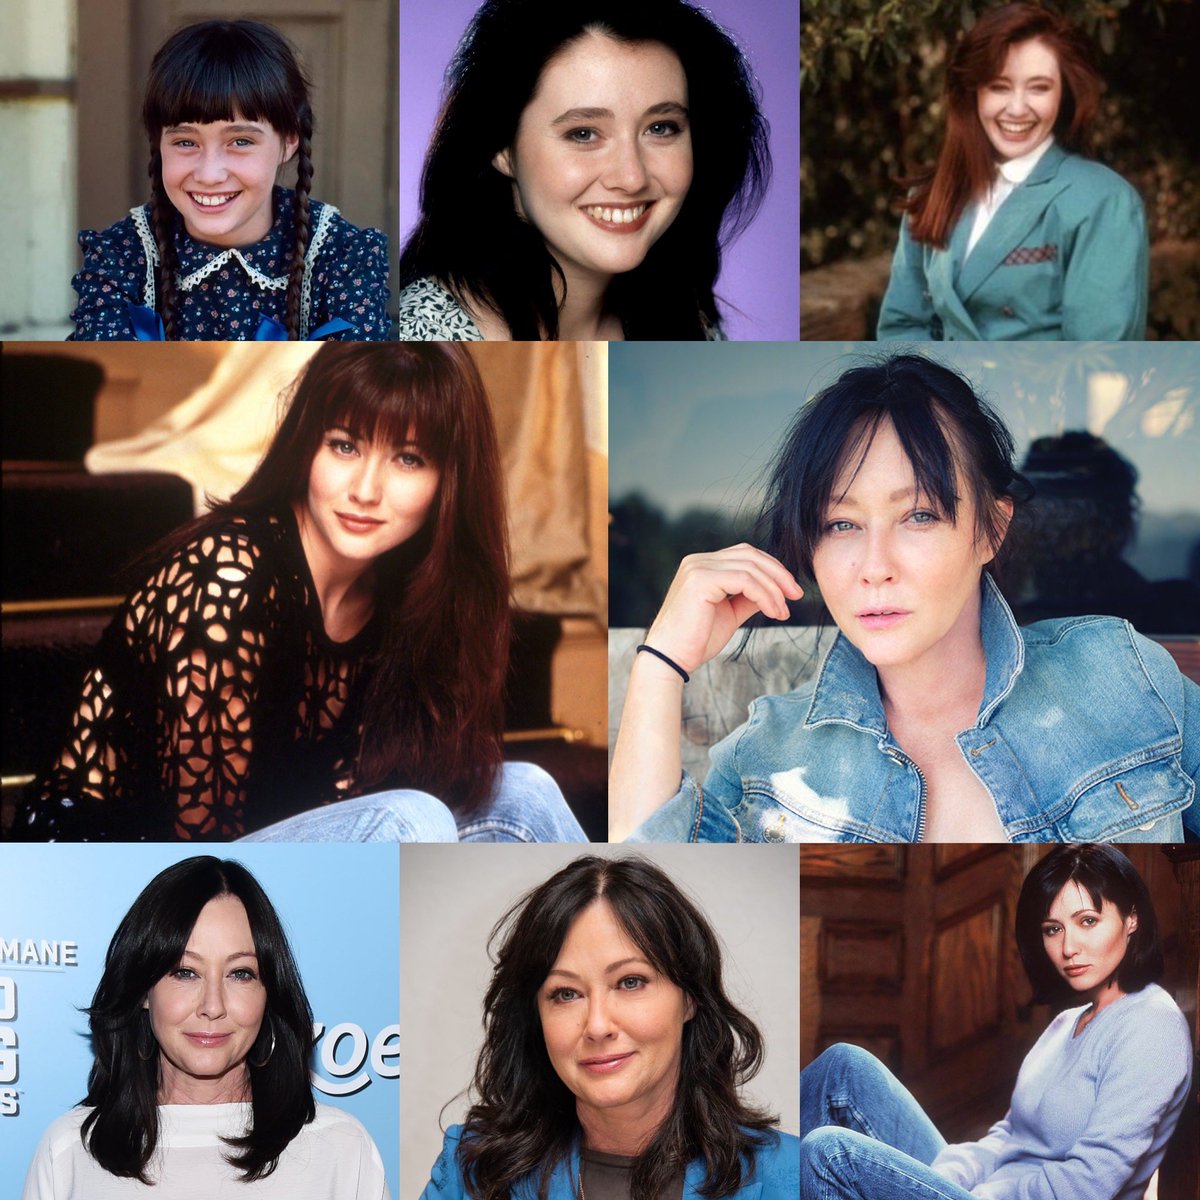 Happy 53rd Birthday! Shannen Doherty (born April 12, 1971) #the80srule #the80s #80sthrowback #80snostalgia #RetroRewind #otd #happybirthday #shannendoherty @DohertyShannen